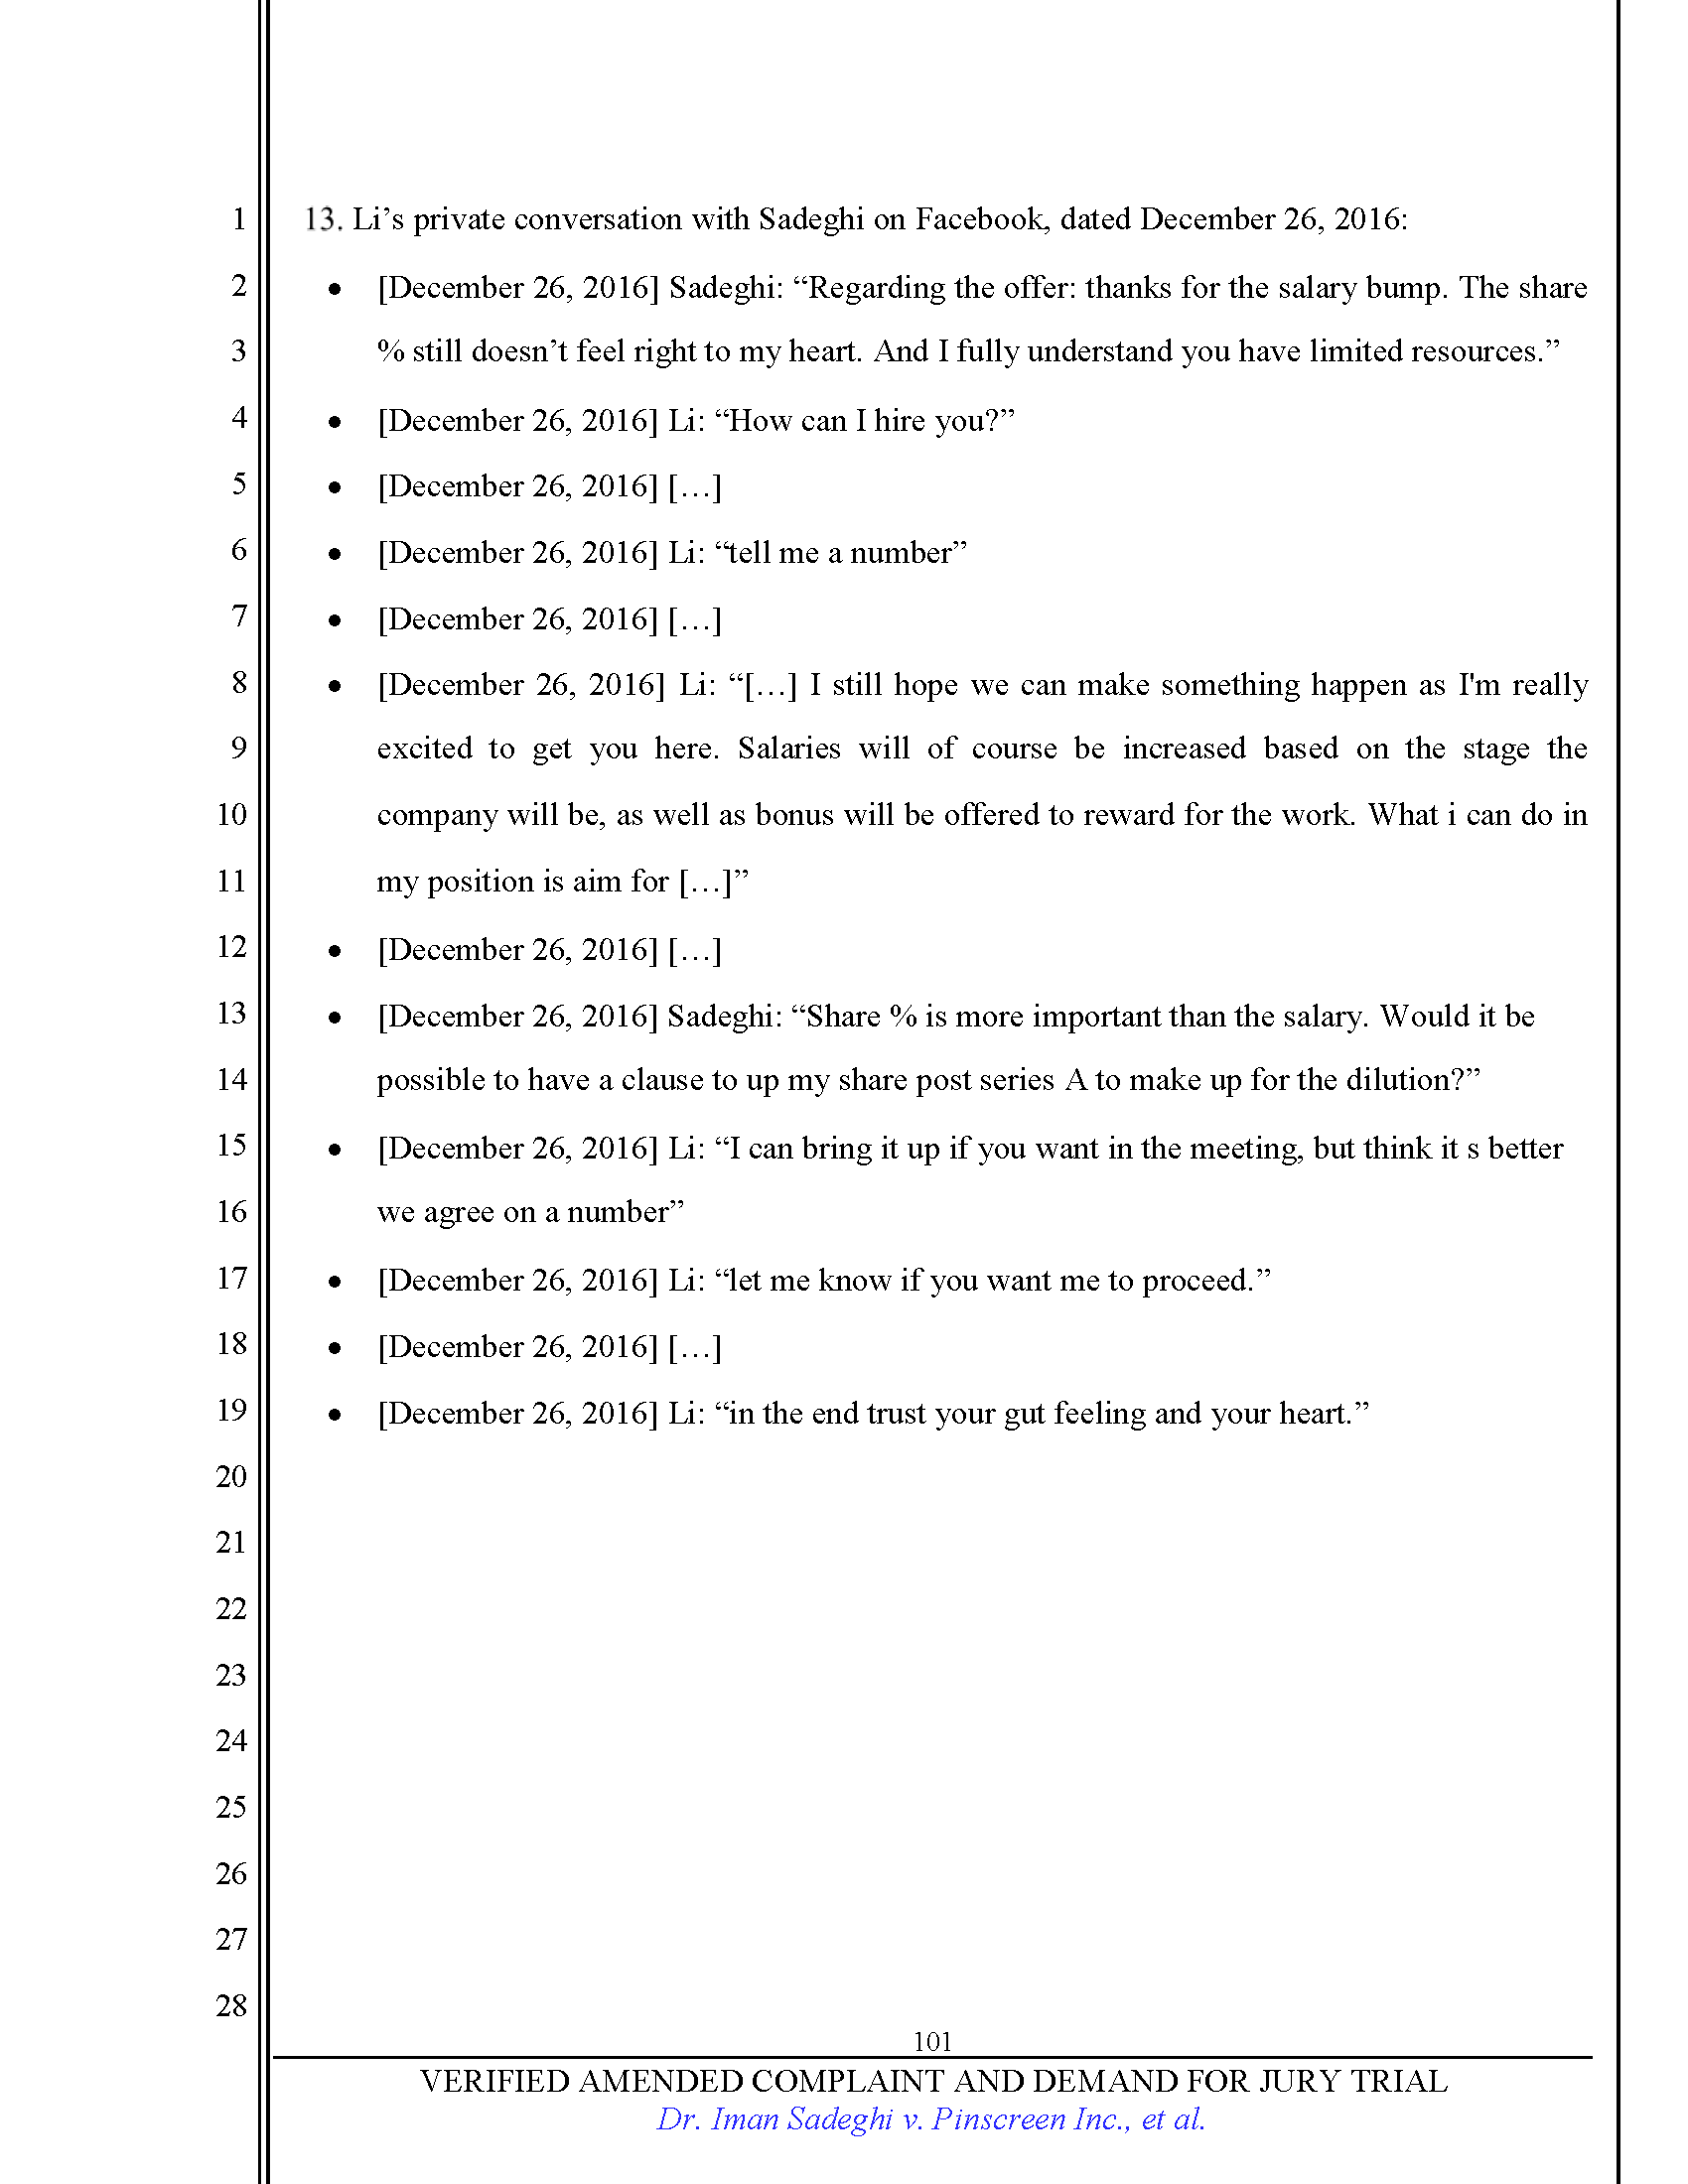 First Amended Complaint (FAC) Page 101